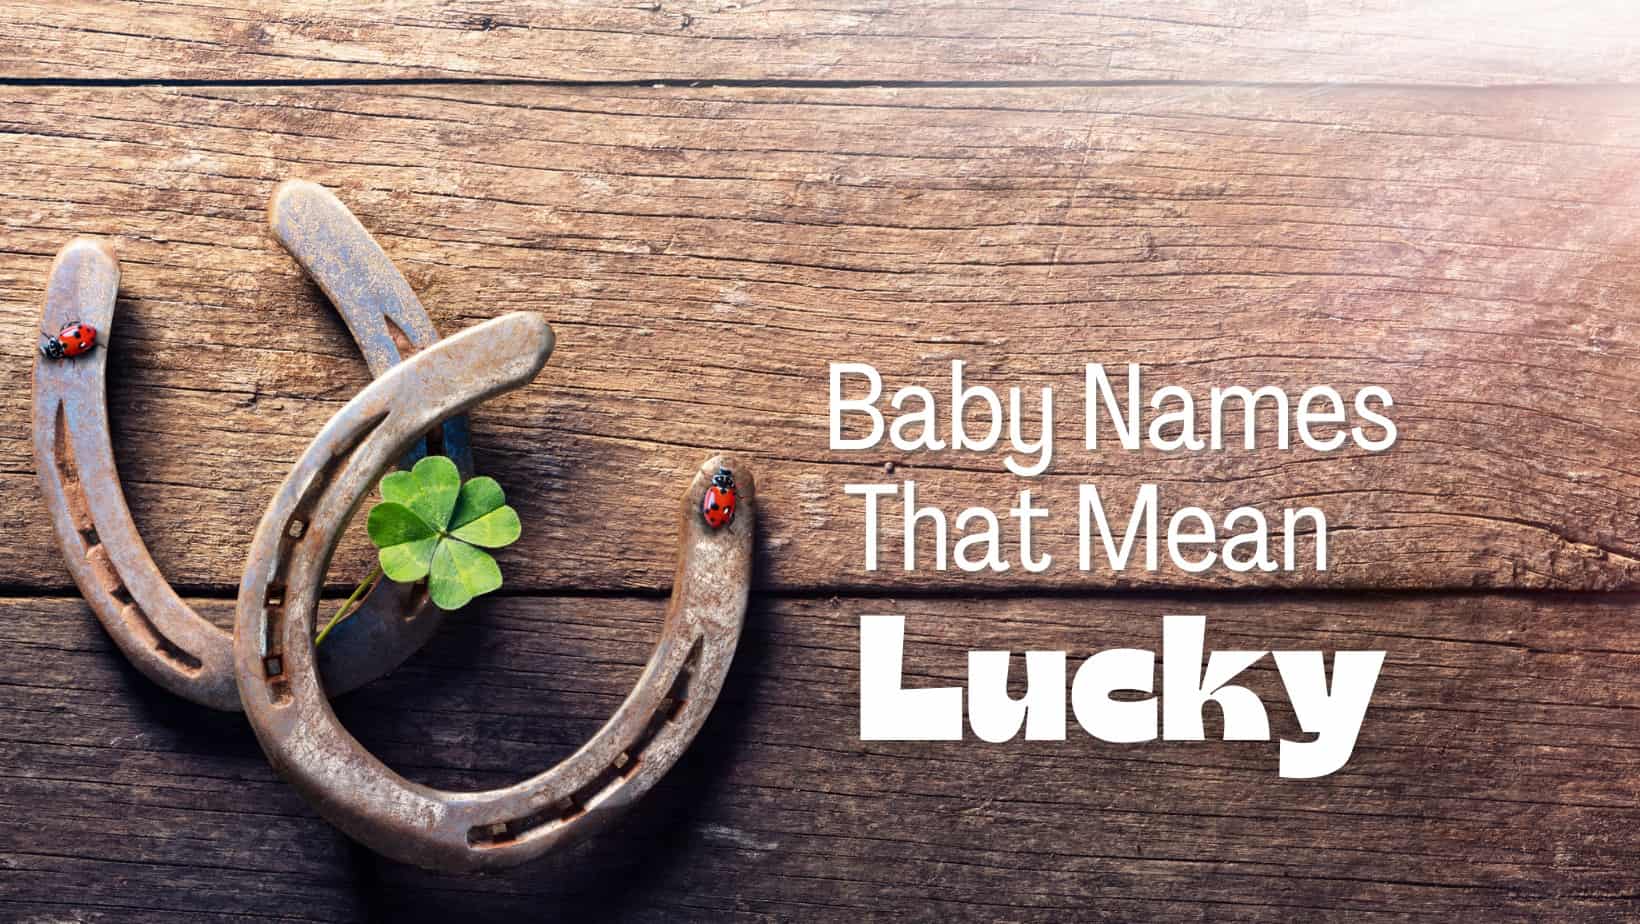 Baby Names That Mean Lucky | MomsWhoThink.com